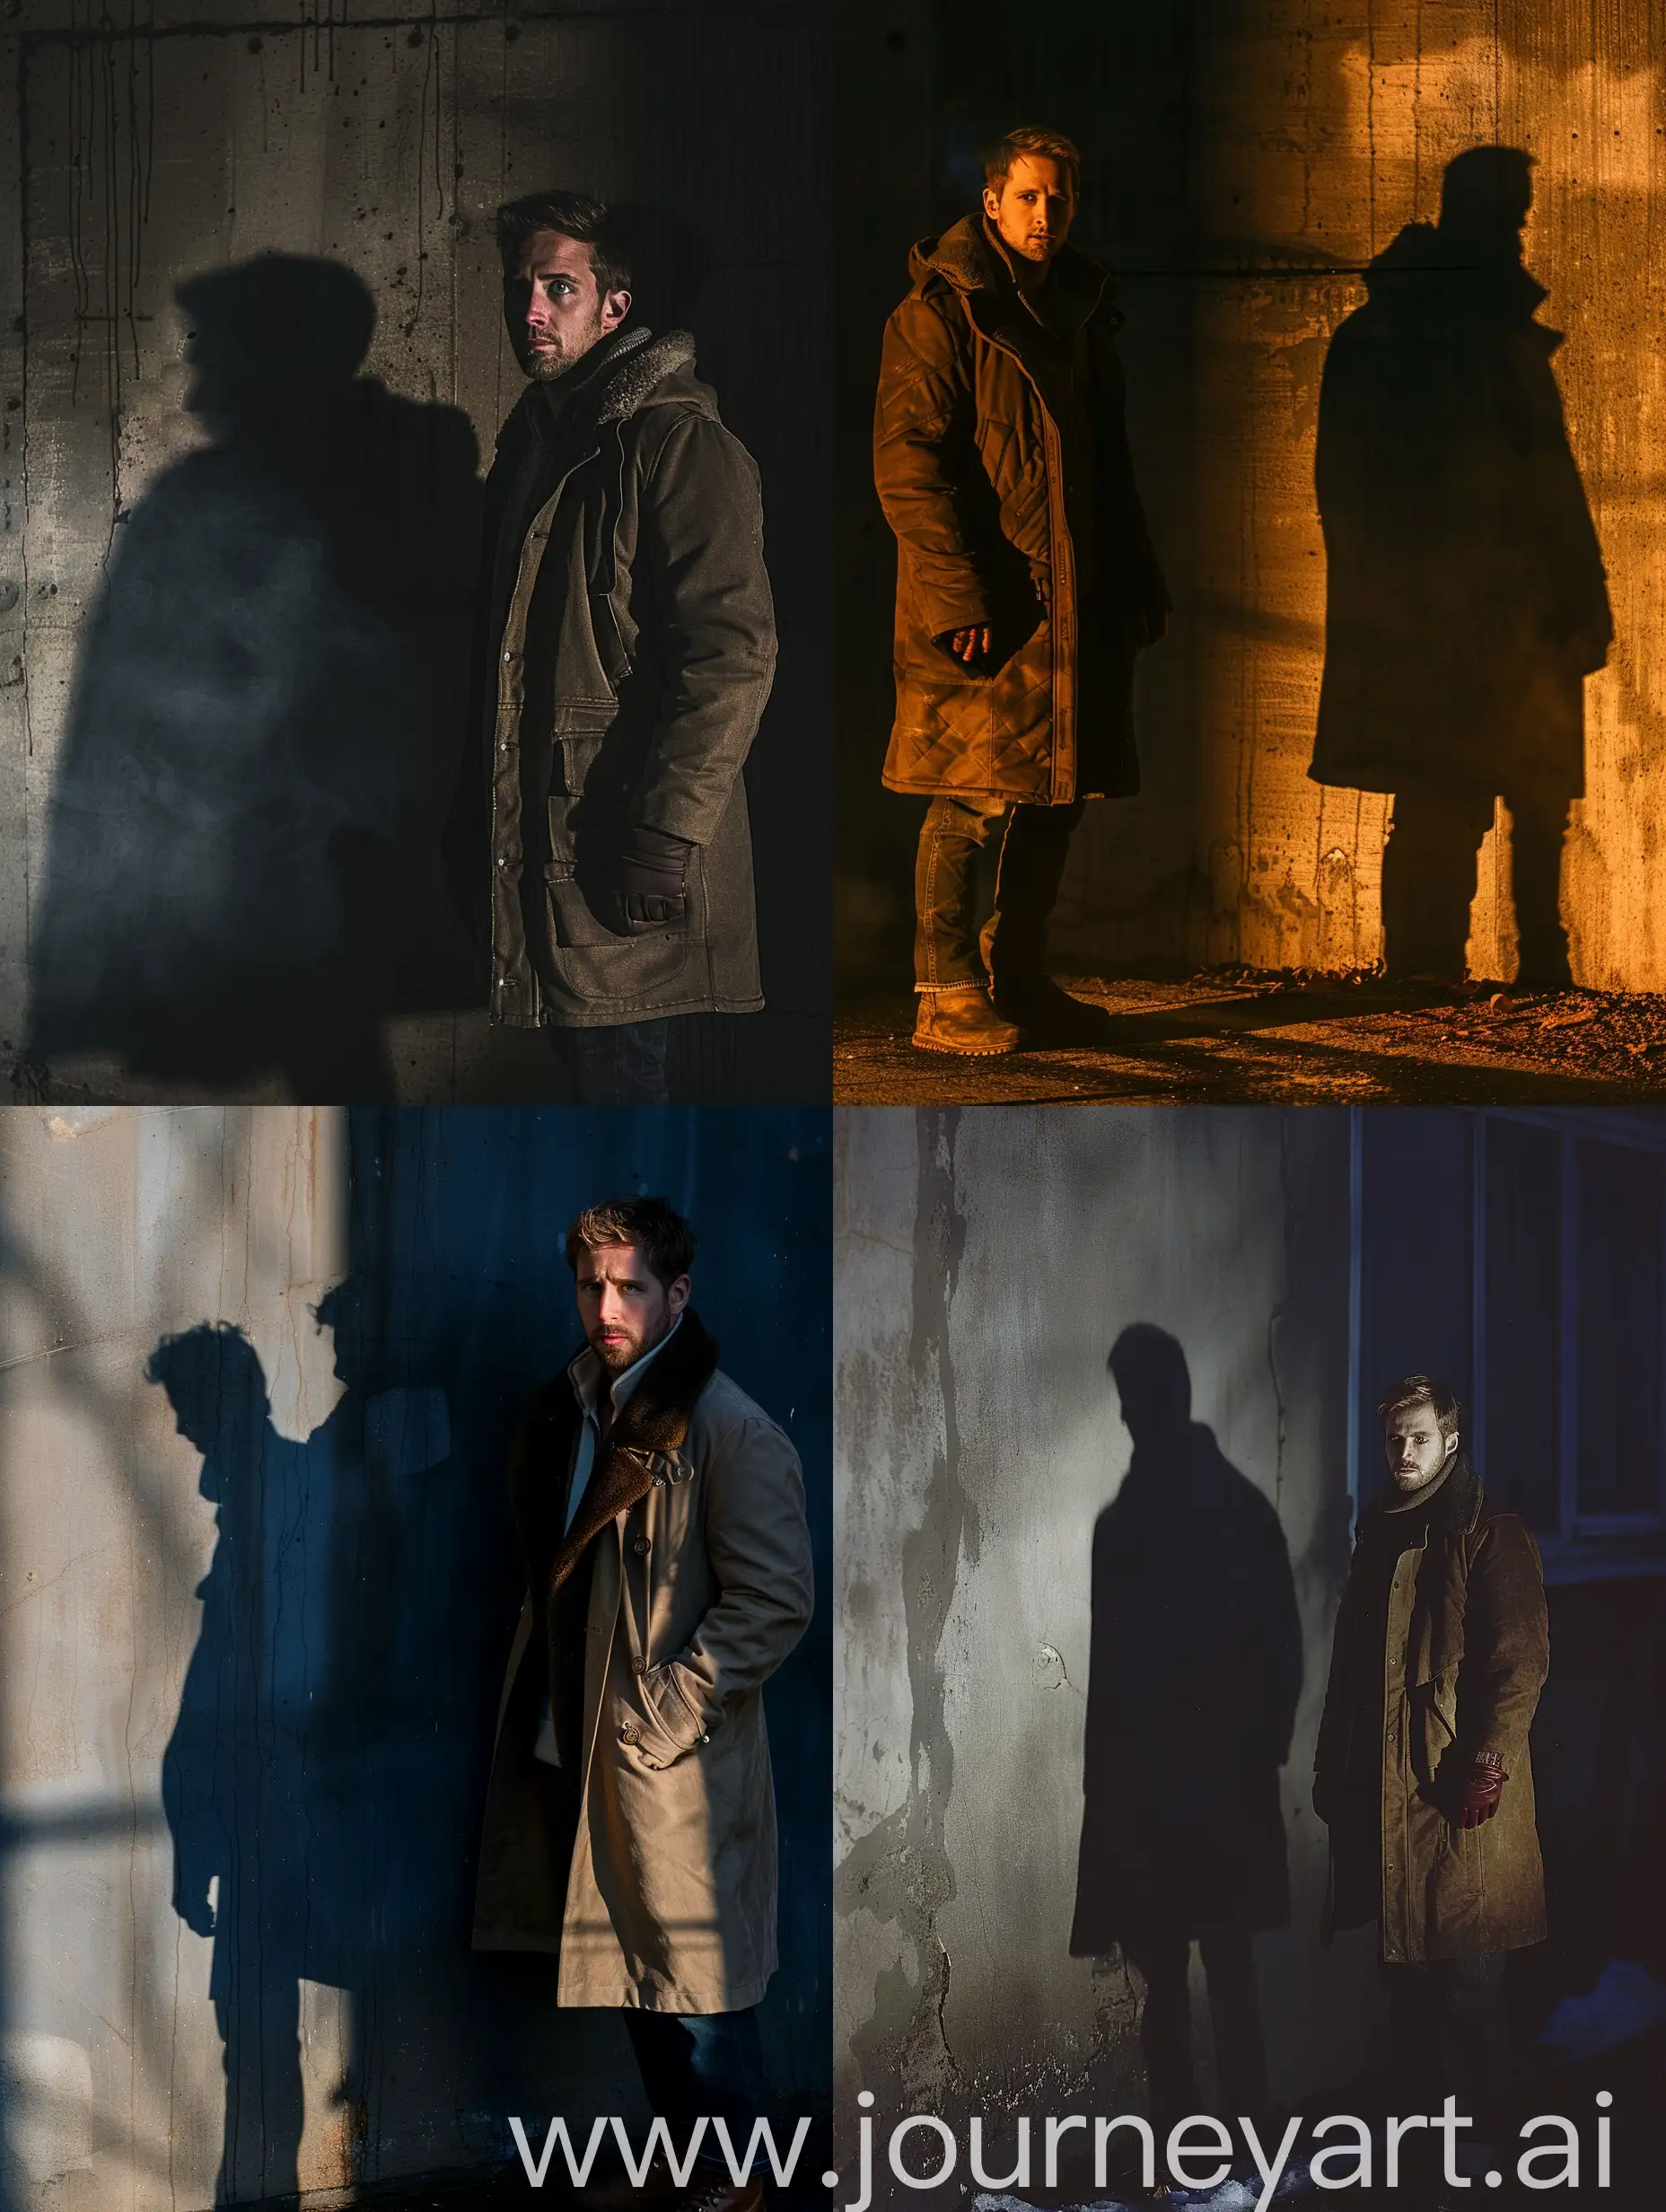 Ryan-Gosling-Standing-in-Cinematic-Winter-Setting-with-Dramatic-Lighting